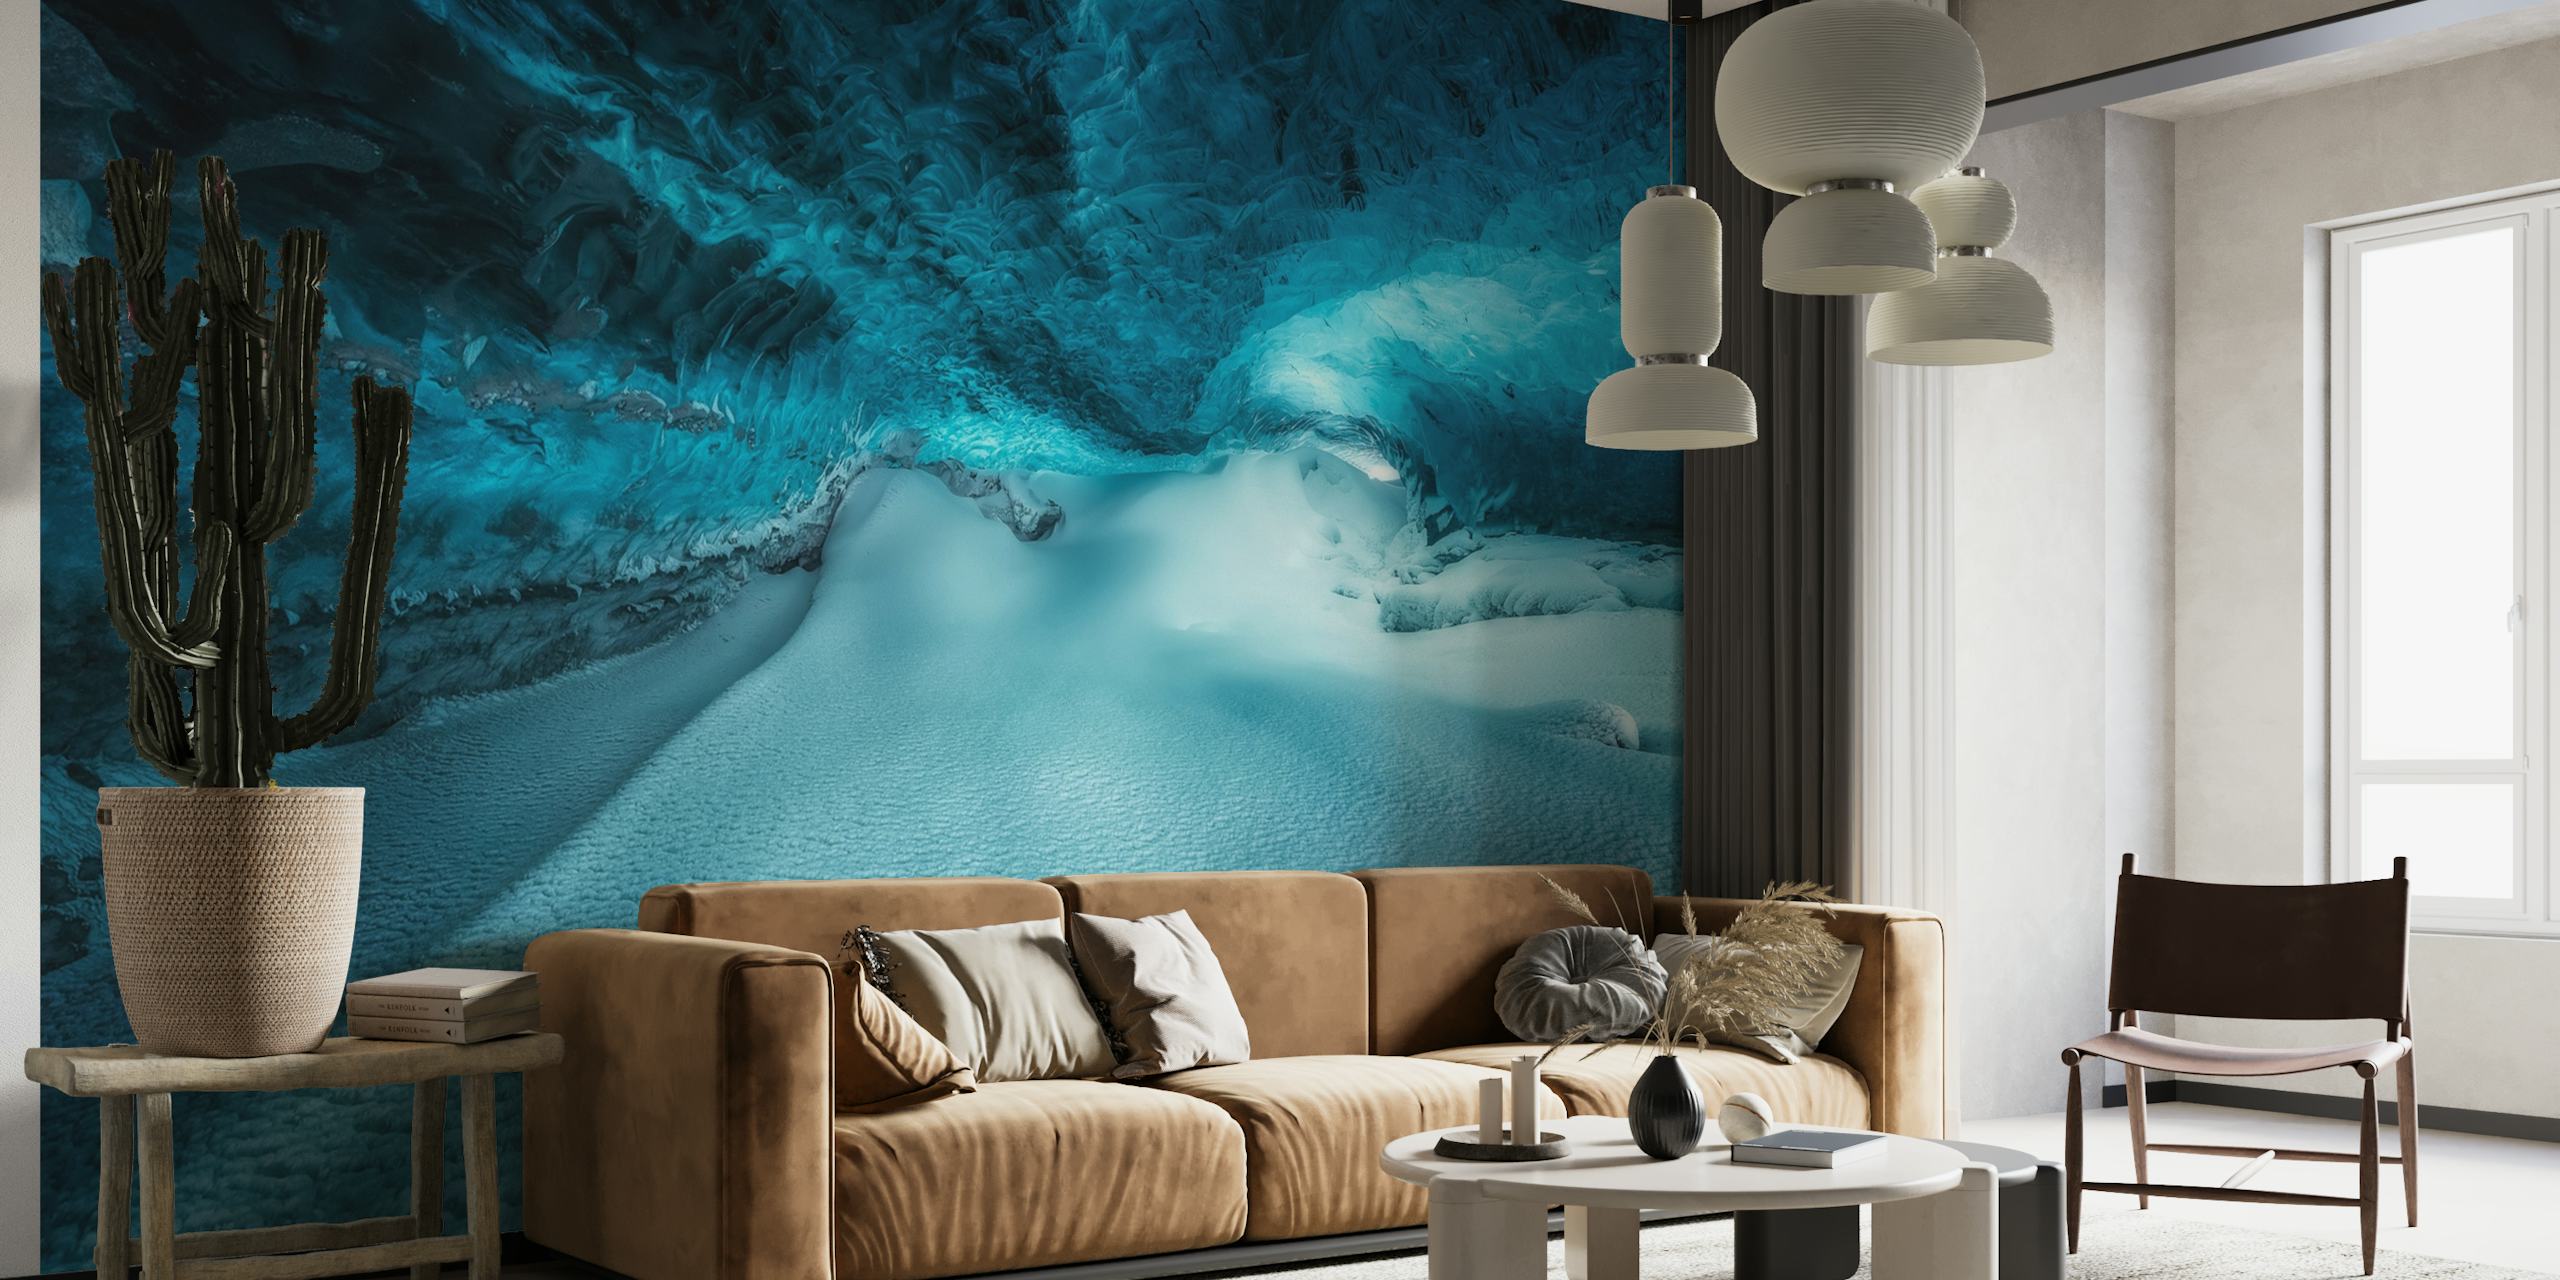 Underwater ice cavern wall mural displaying shades of blue and frozen textures